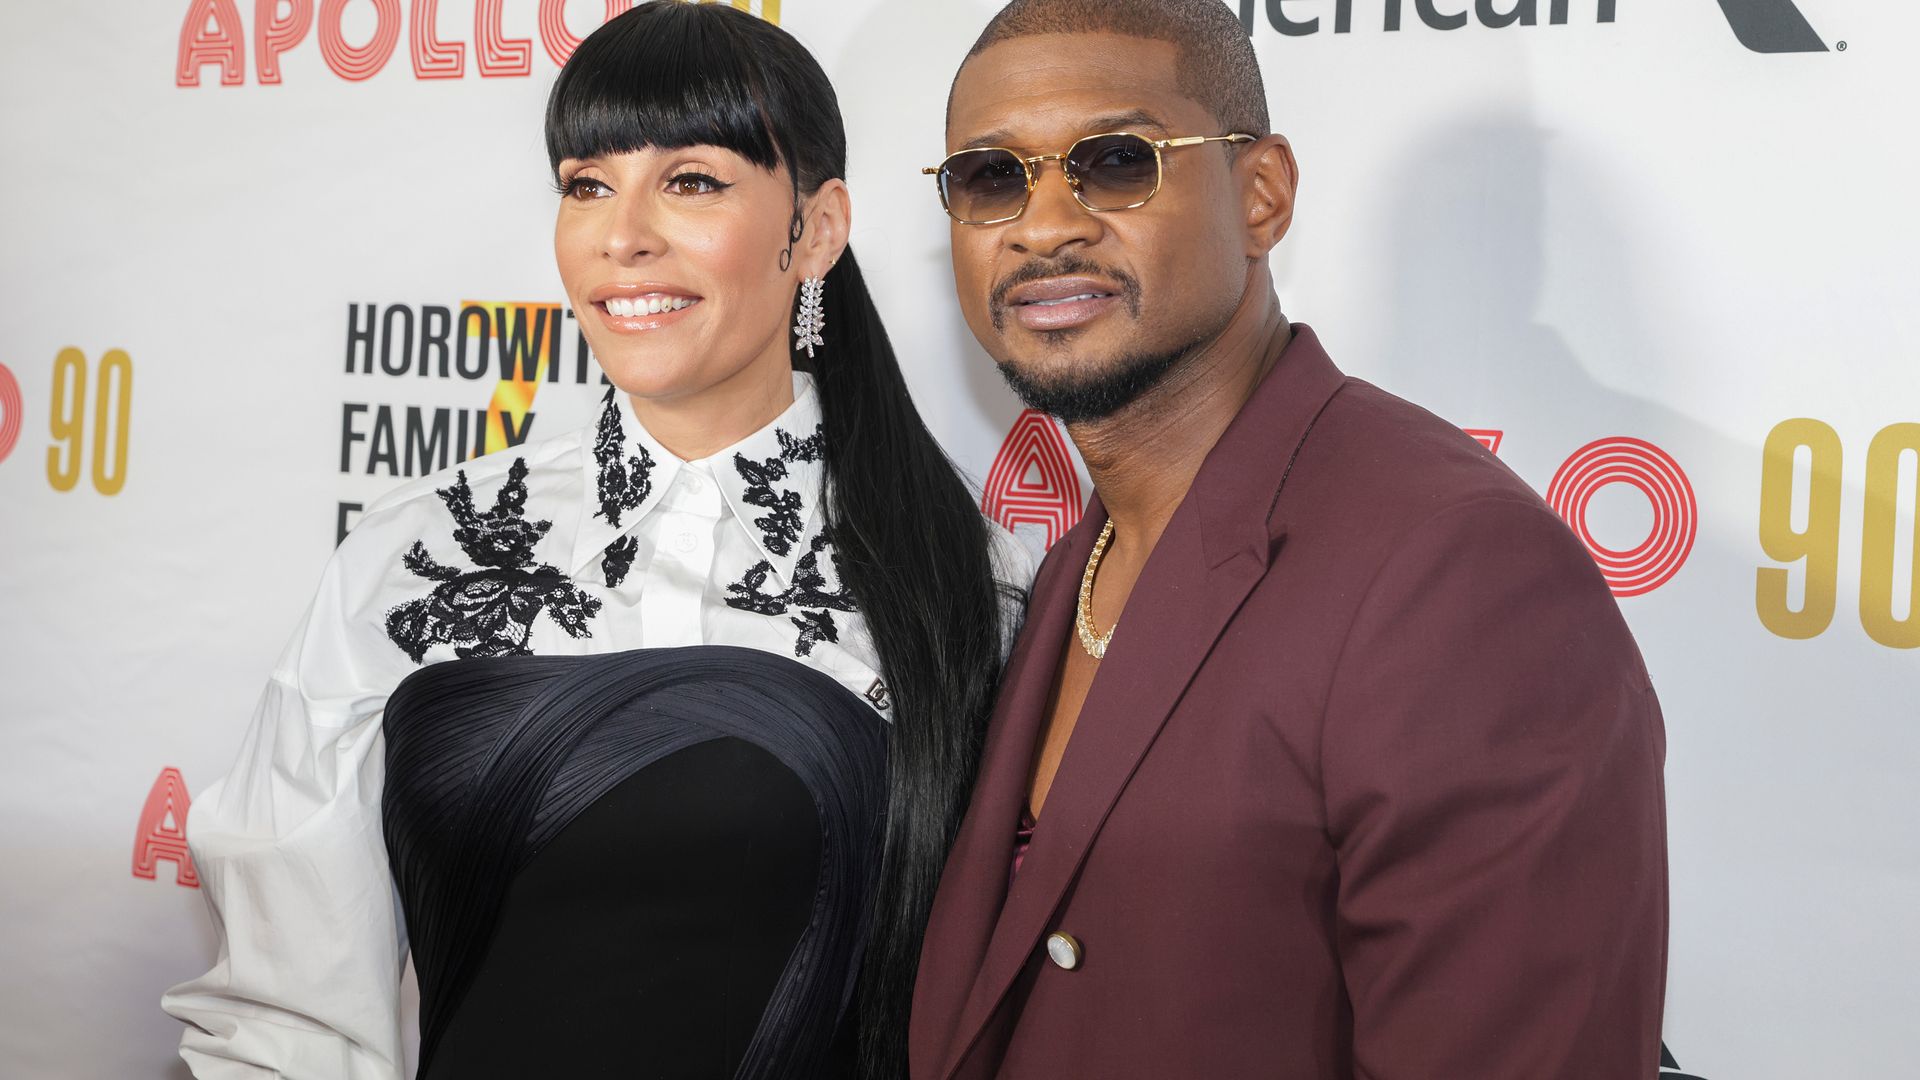 Usher's emotional message for wife Jennifer Goicoechea — 'I'm so happy we could do this together'